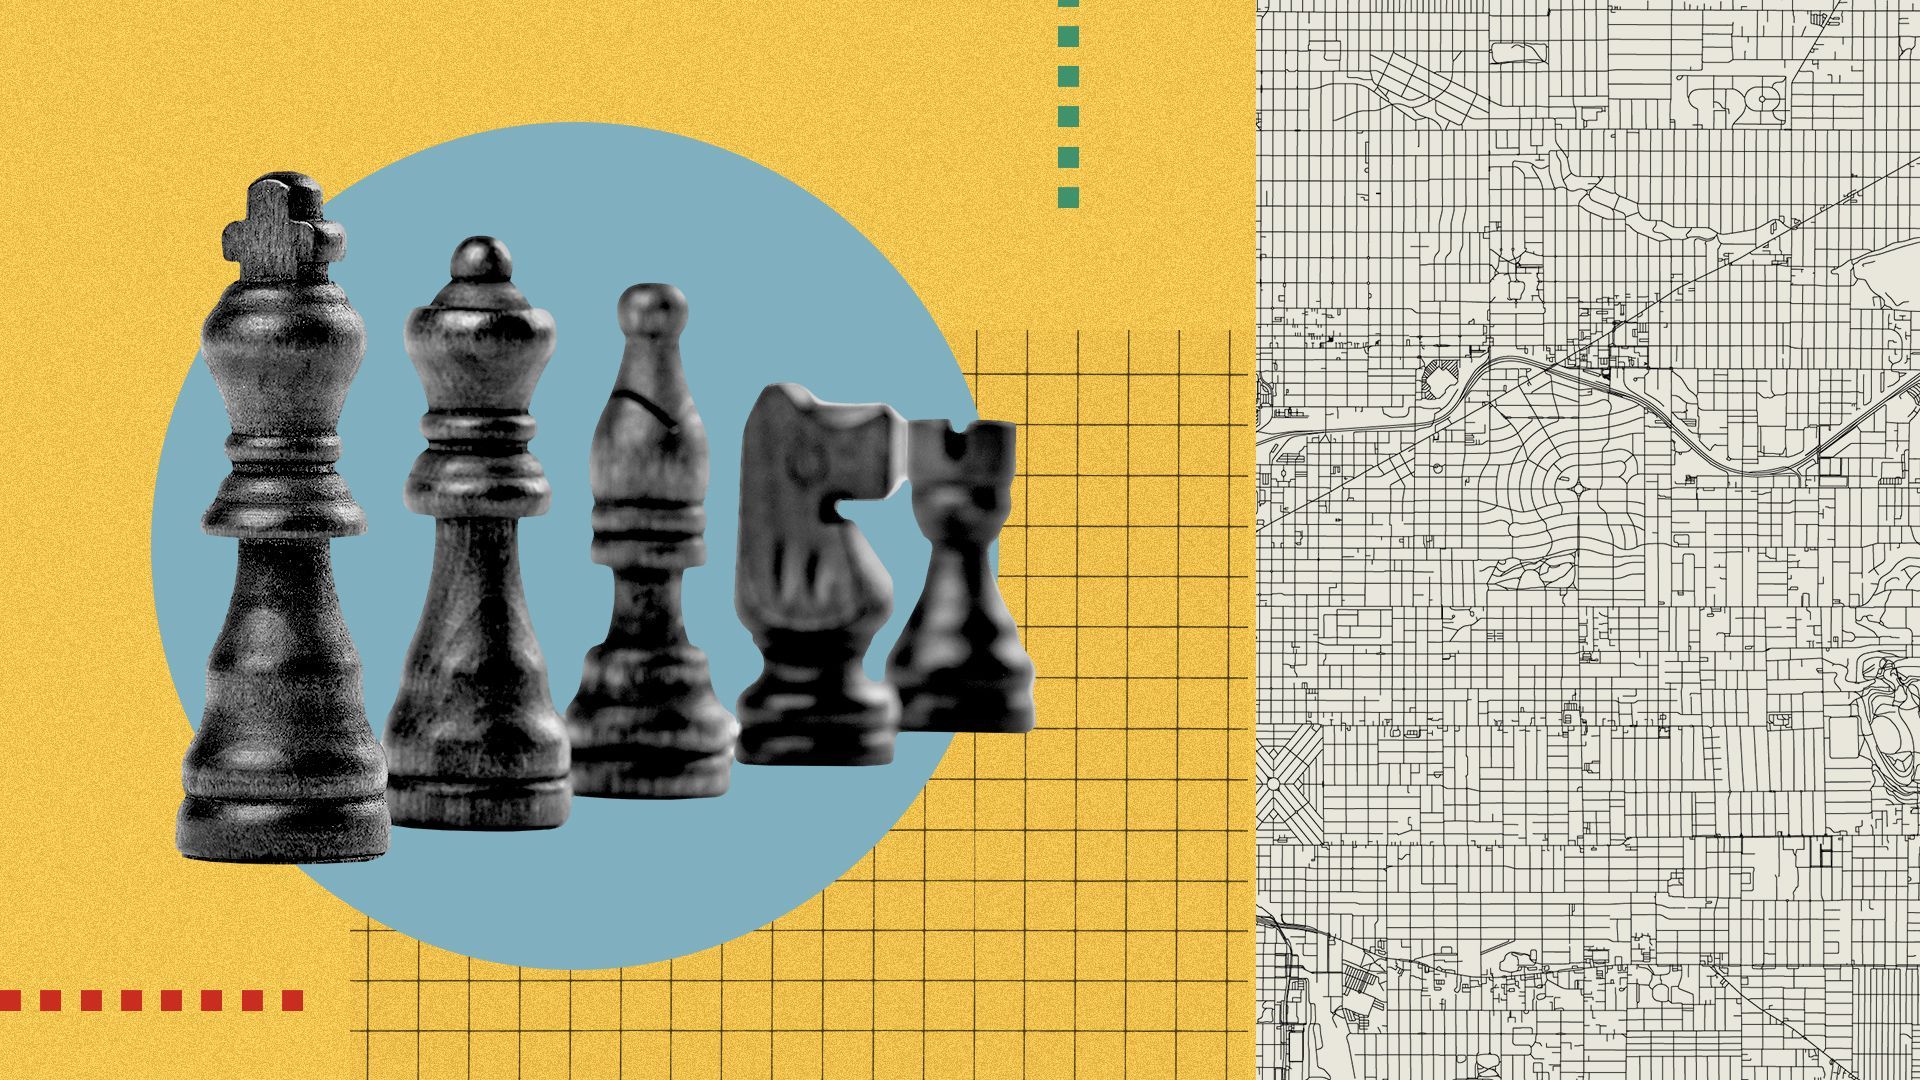 Photo illustration of chess pieces inside a circle with a grid and the map of Portland in the background.